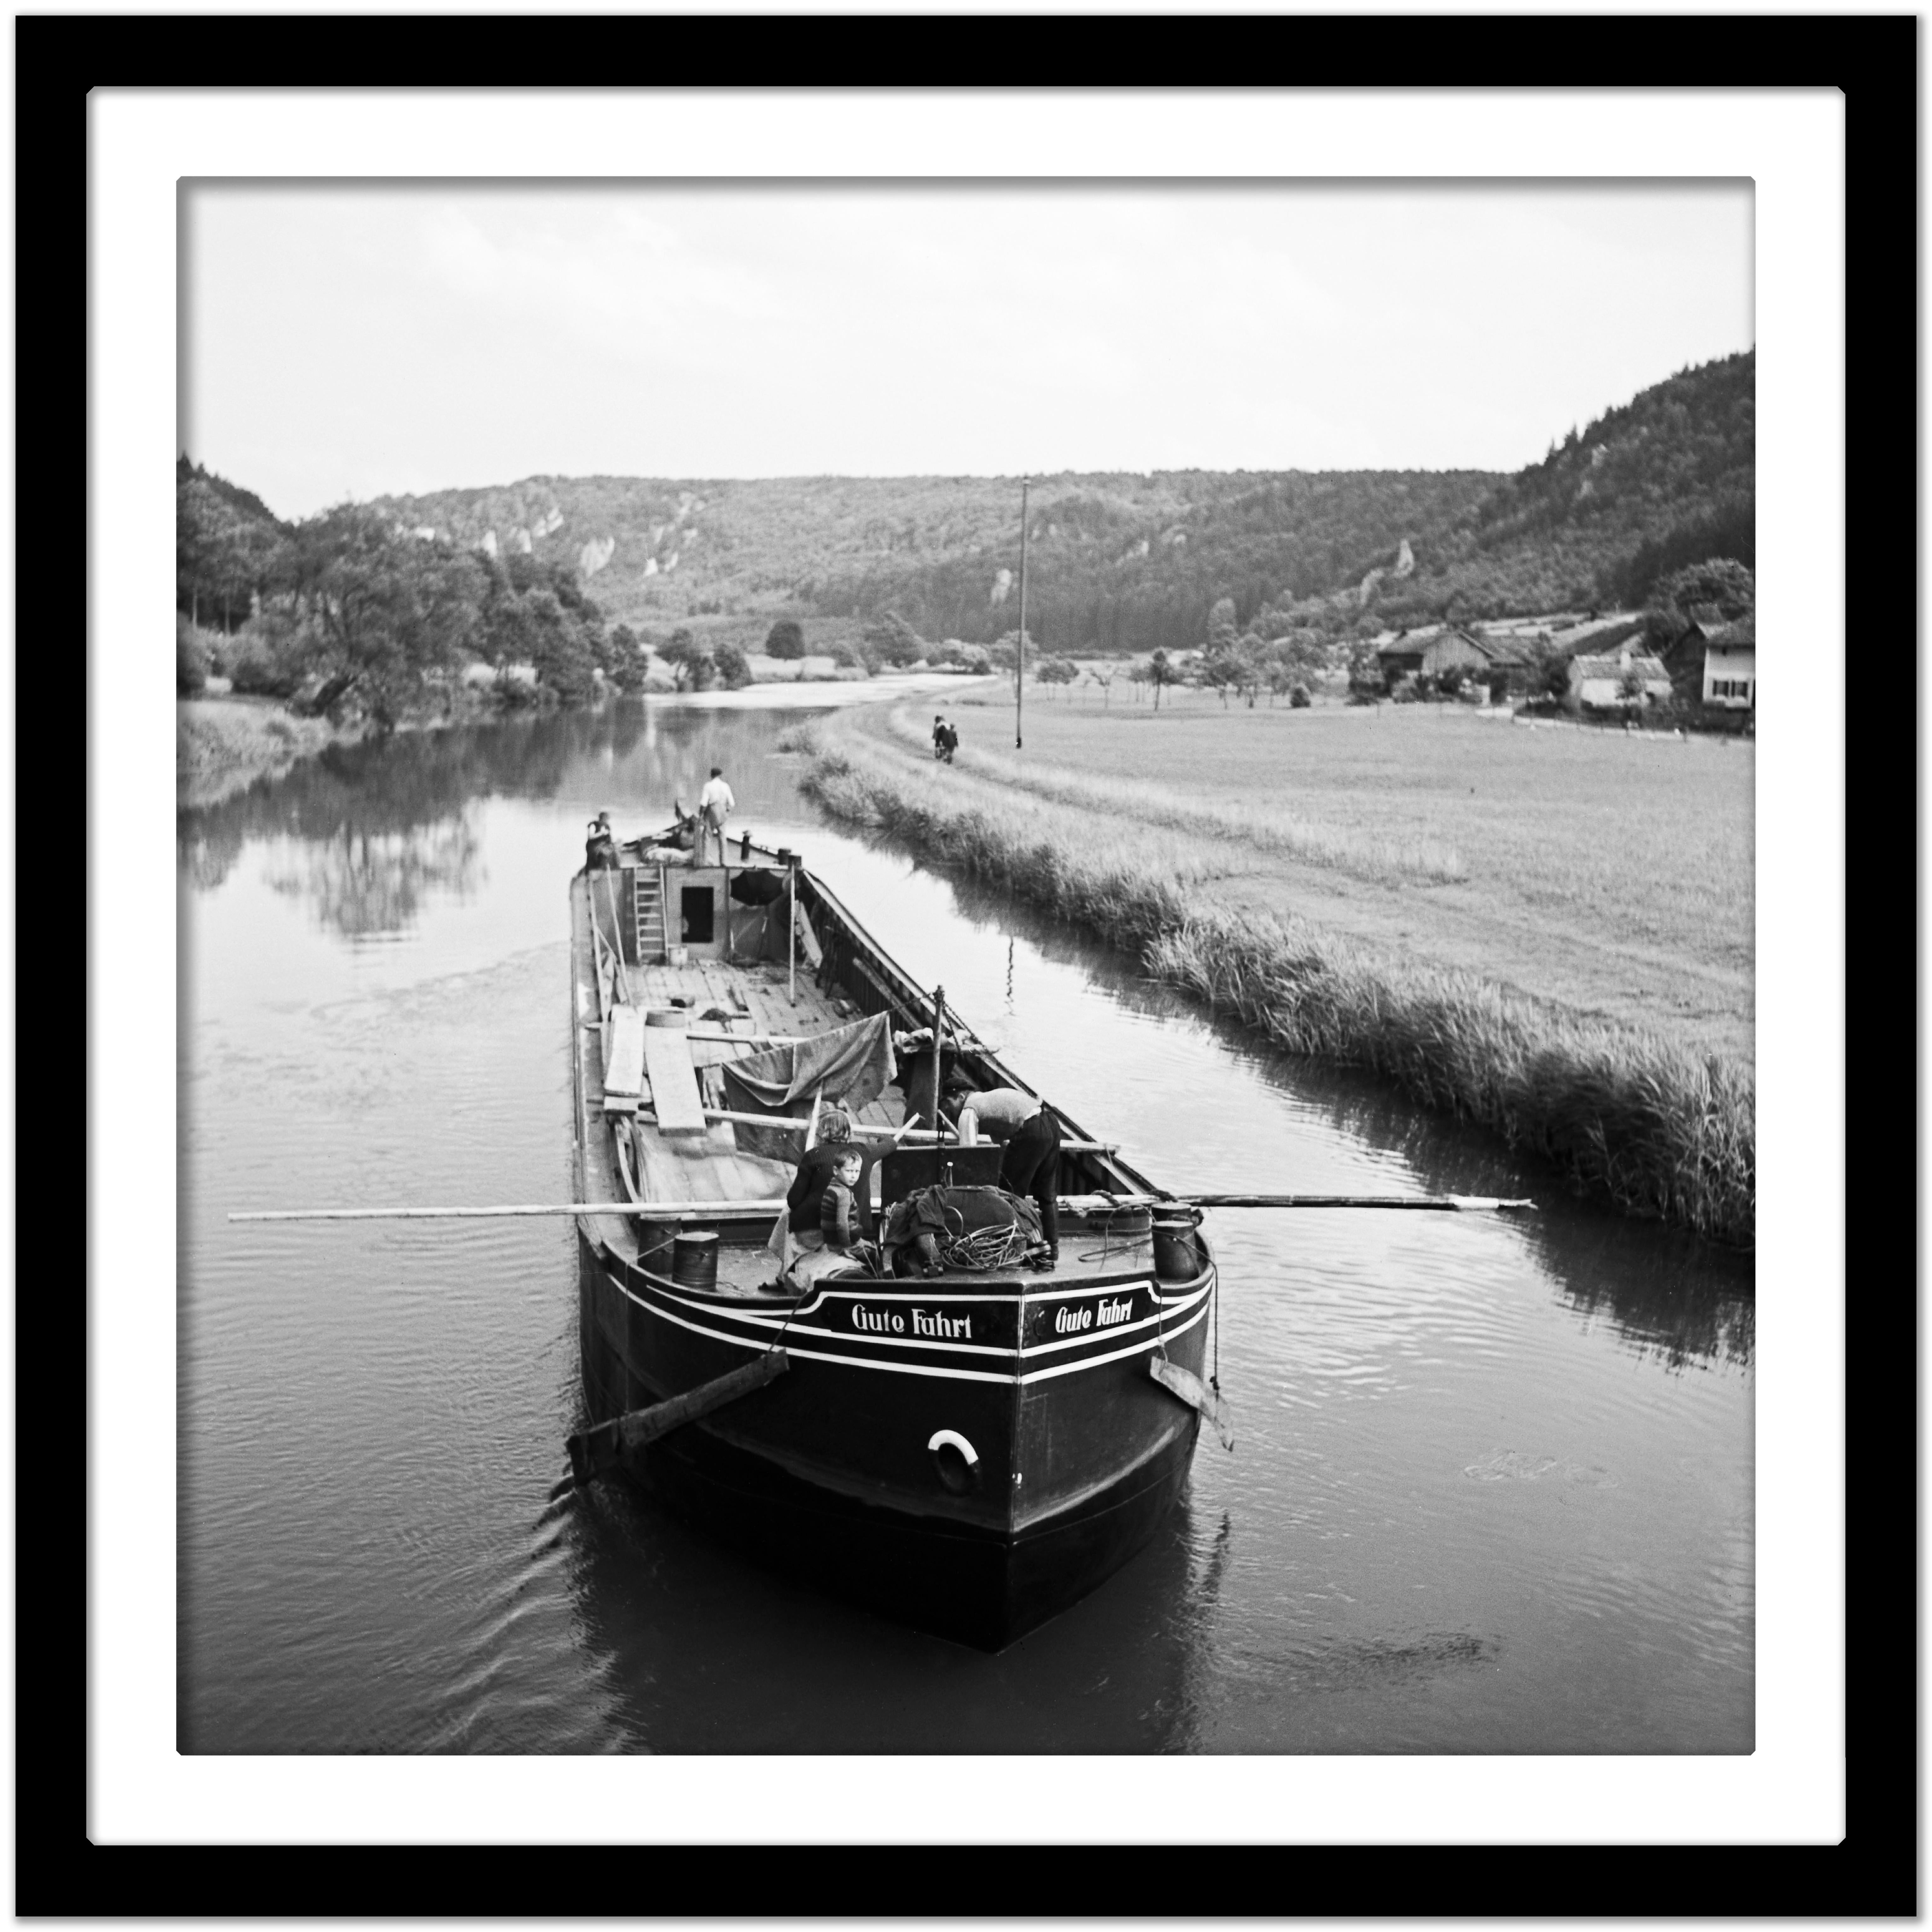 Freight ship on river Altmuehl at Altmuehltal valley, Germany 1937 Printed Later - Modern Photograph by Karl Heinrich Lämmel